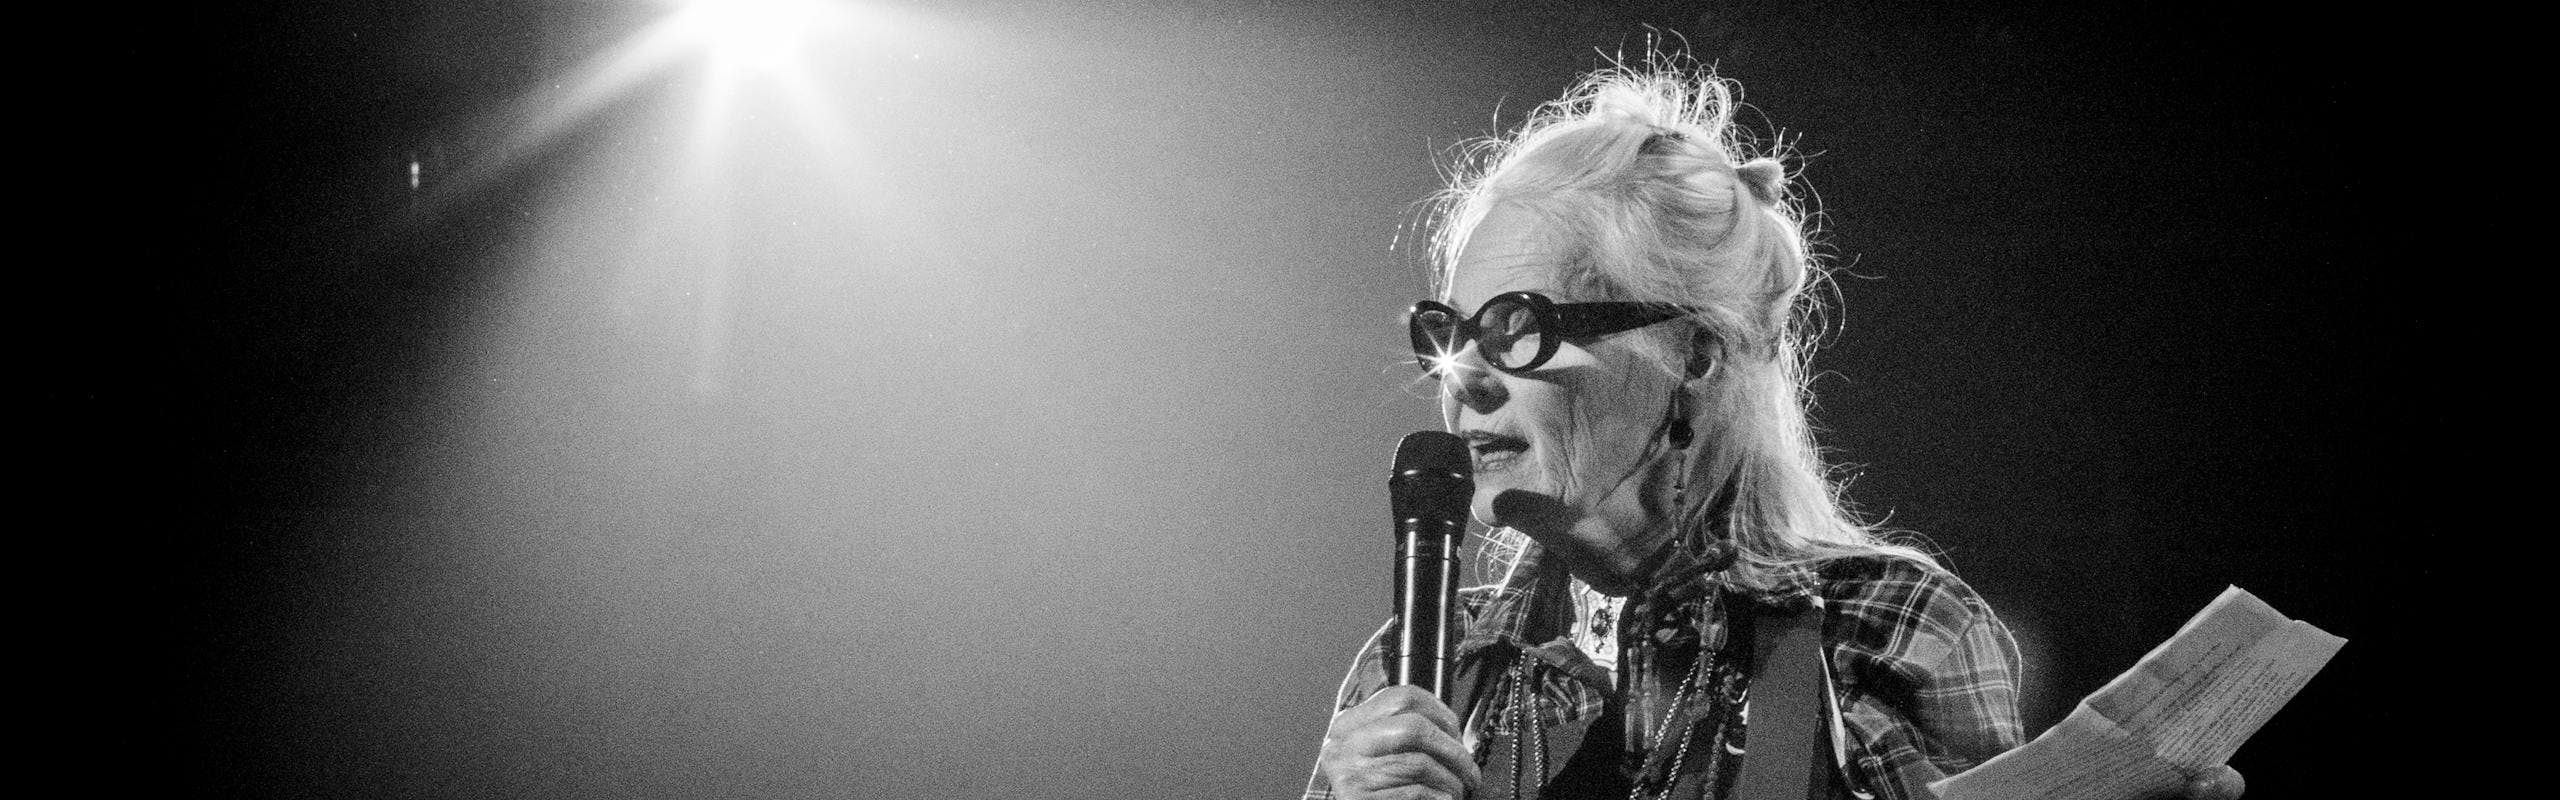 Black and white photo Vivienne Westwood with a microphone under a spotlight